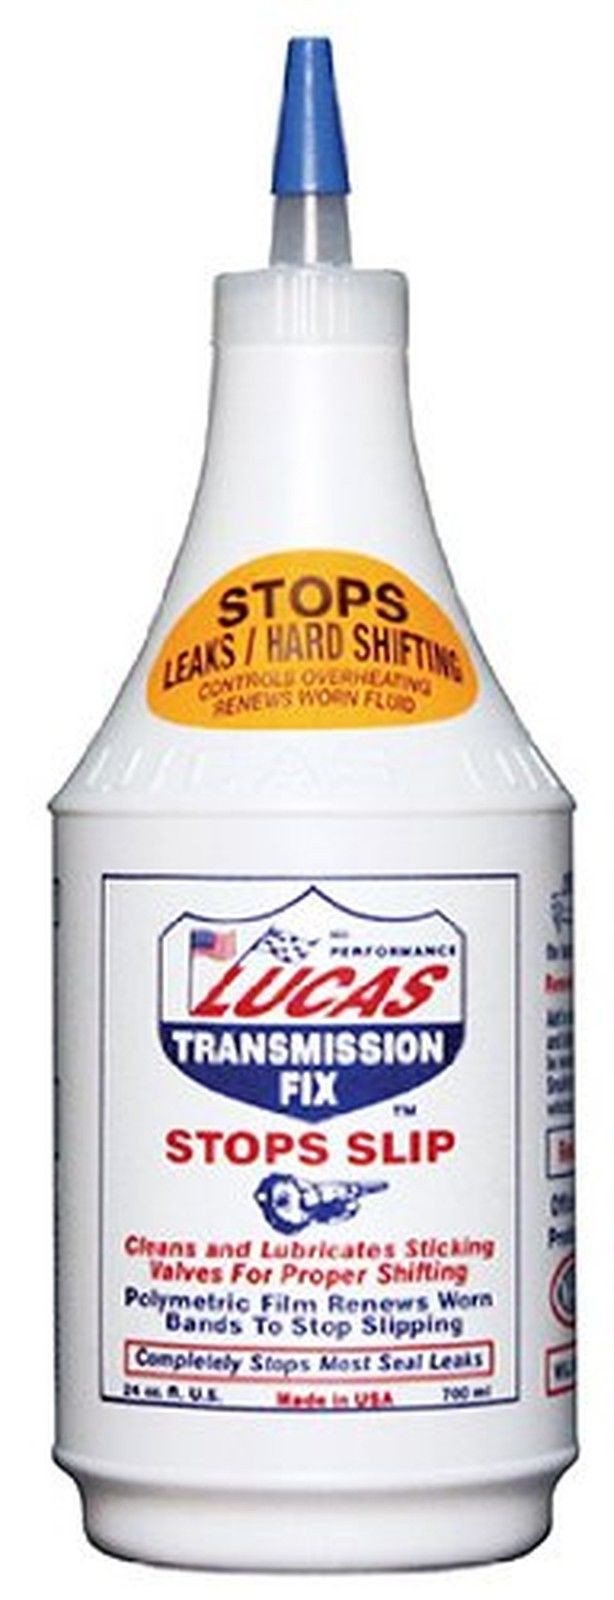 Slip and stop. Luc10009 transmission Fix. Stop&clean де. Worn gearbox. Lubricates.